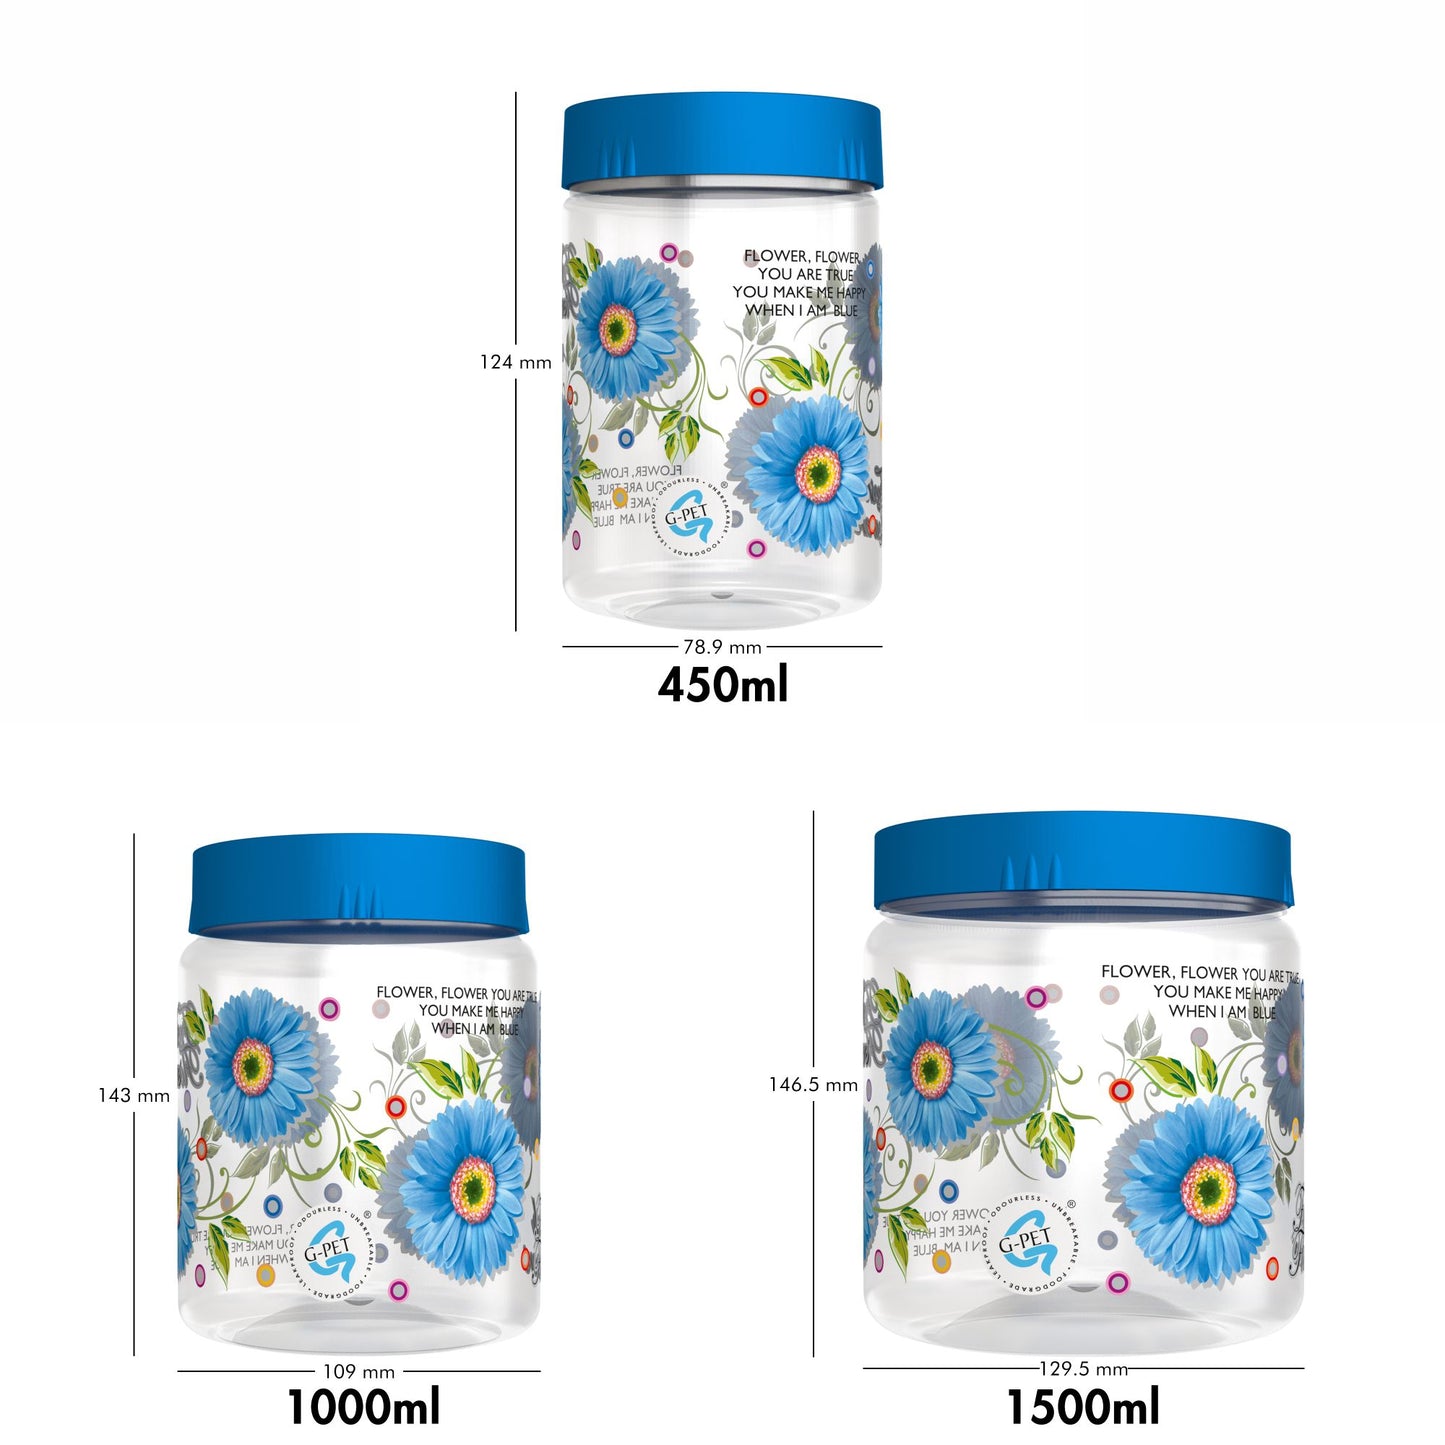 Print Magic Container Blue Pack of 9 - 1500ml (3 pcs), 1000ml (3 pcs), 450ml (3 pcs) Plastic Grocery Container